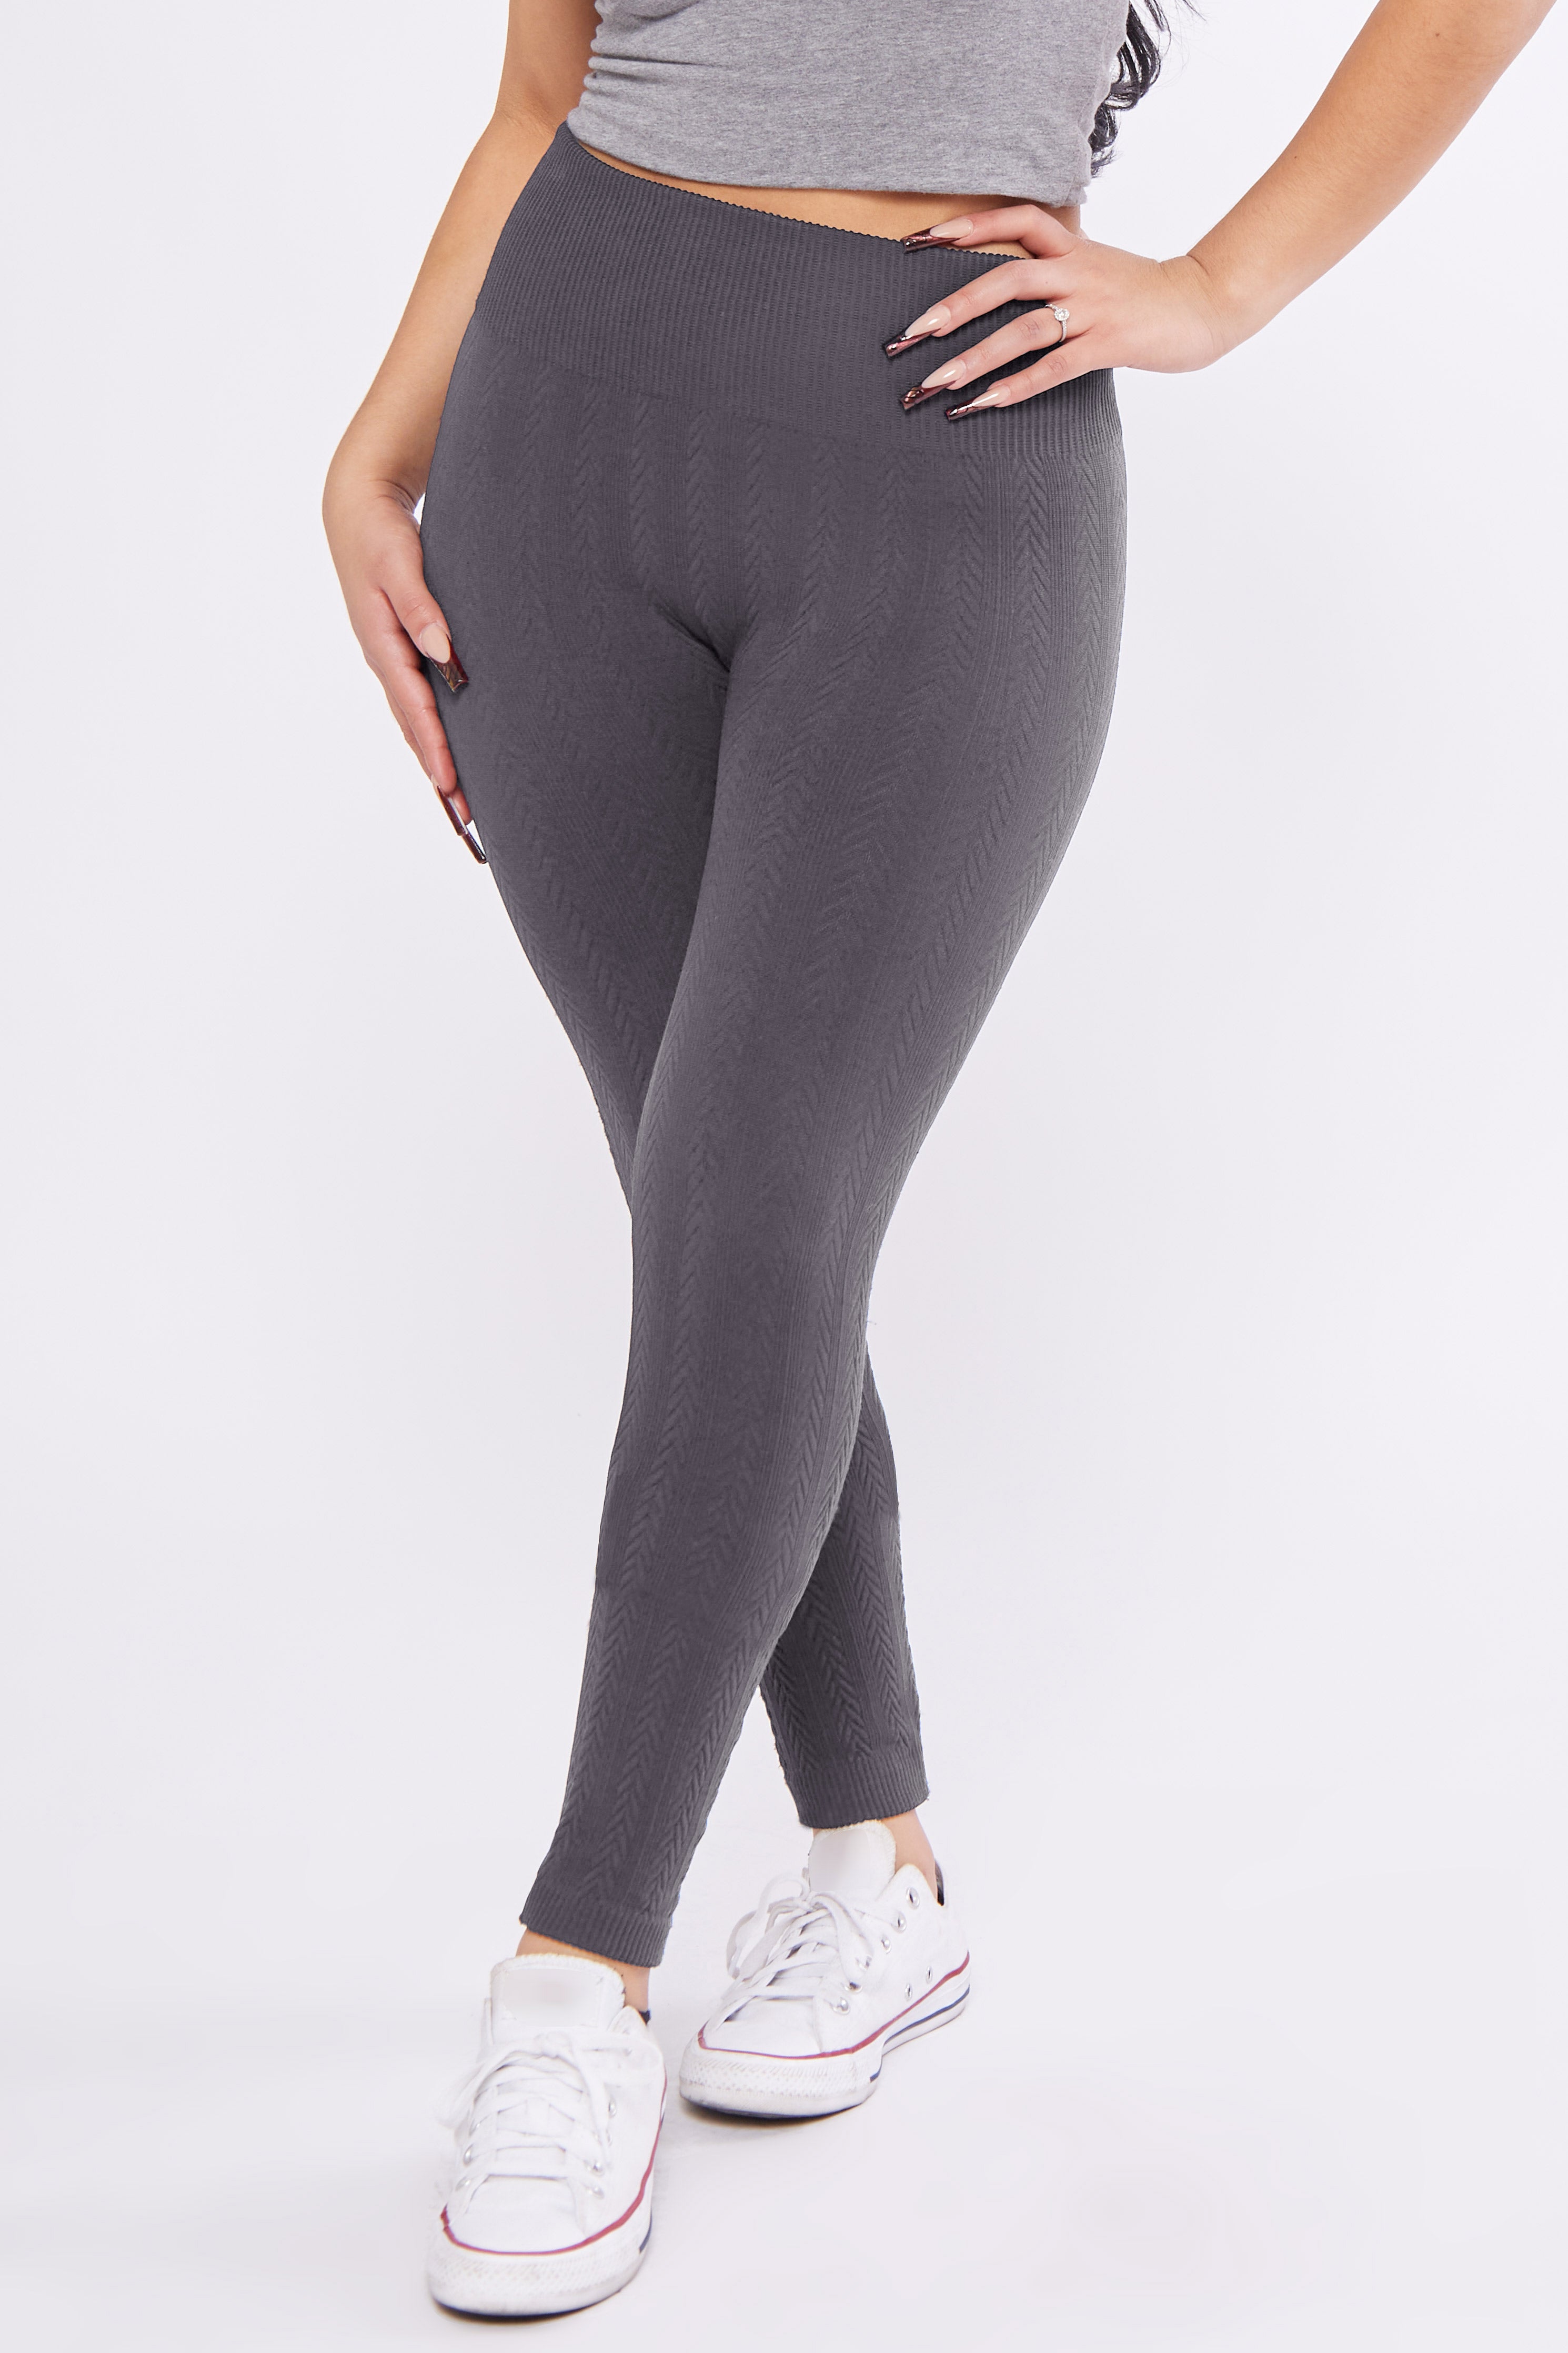 These Fleece-Lined Leggings Are All Under $30 at Amazon